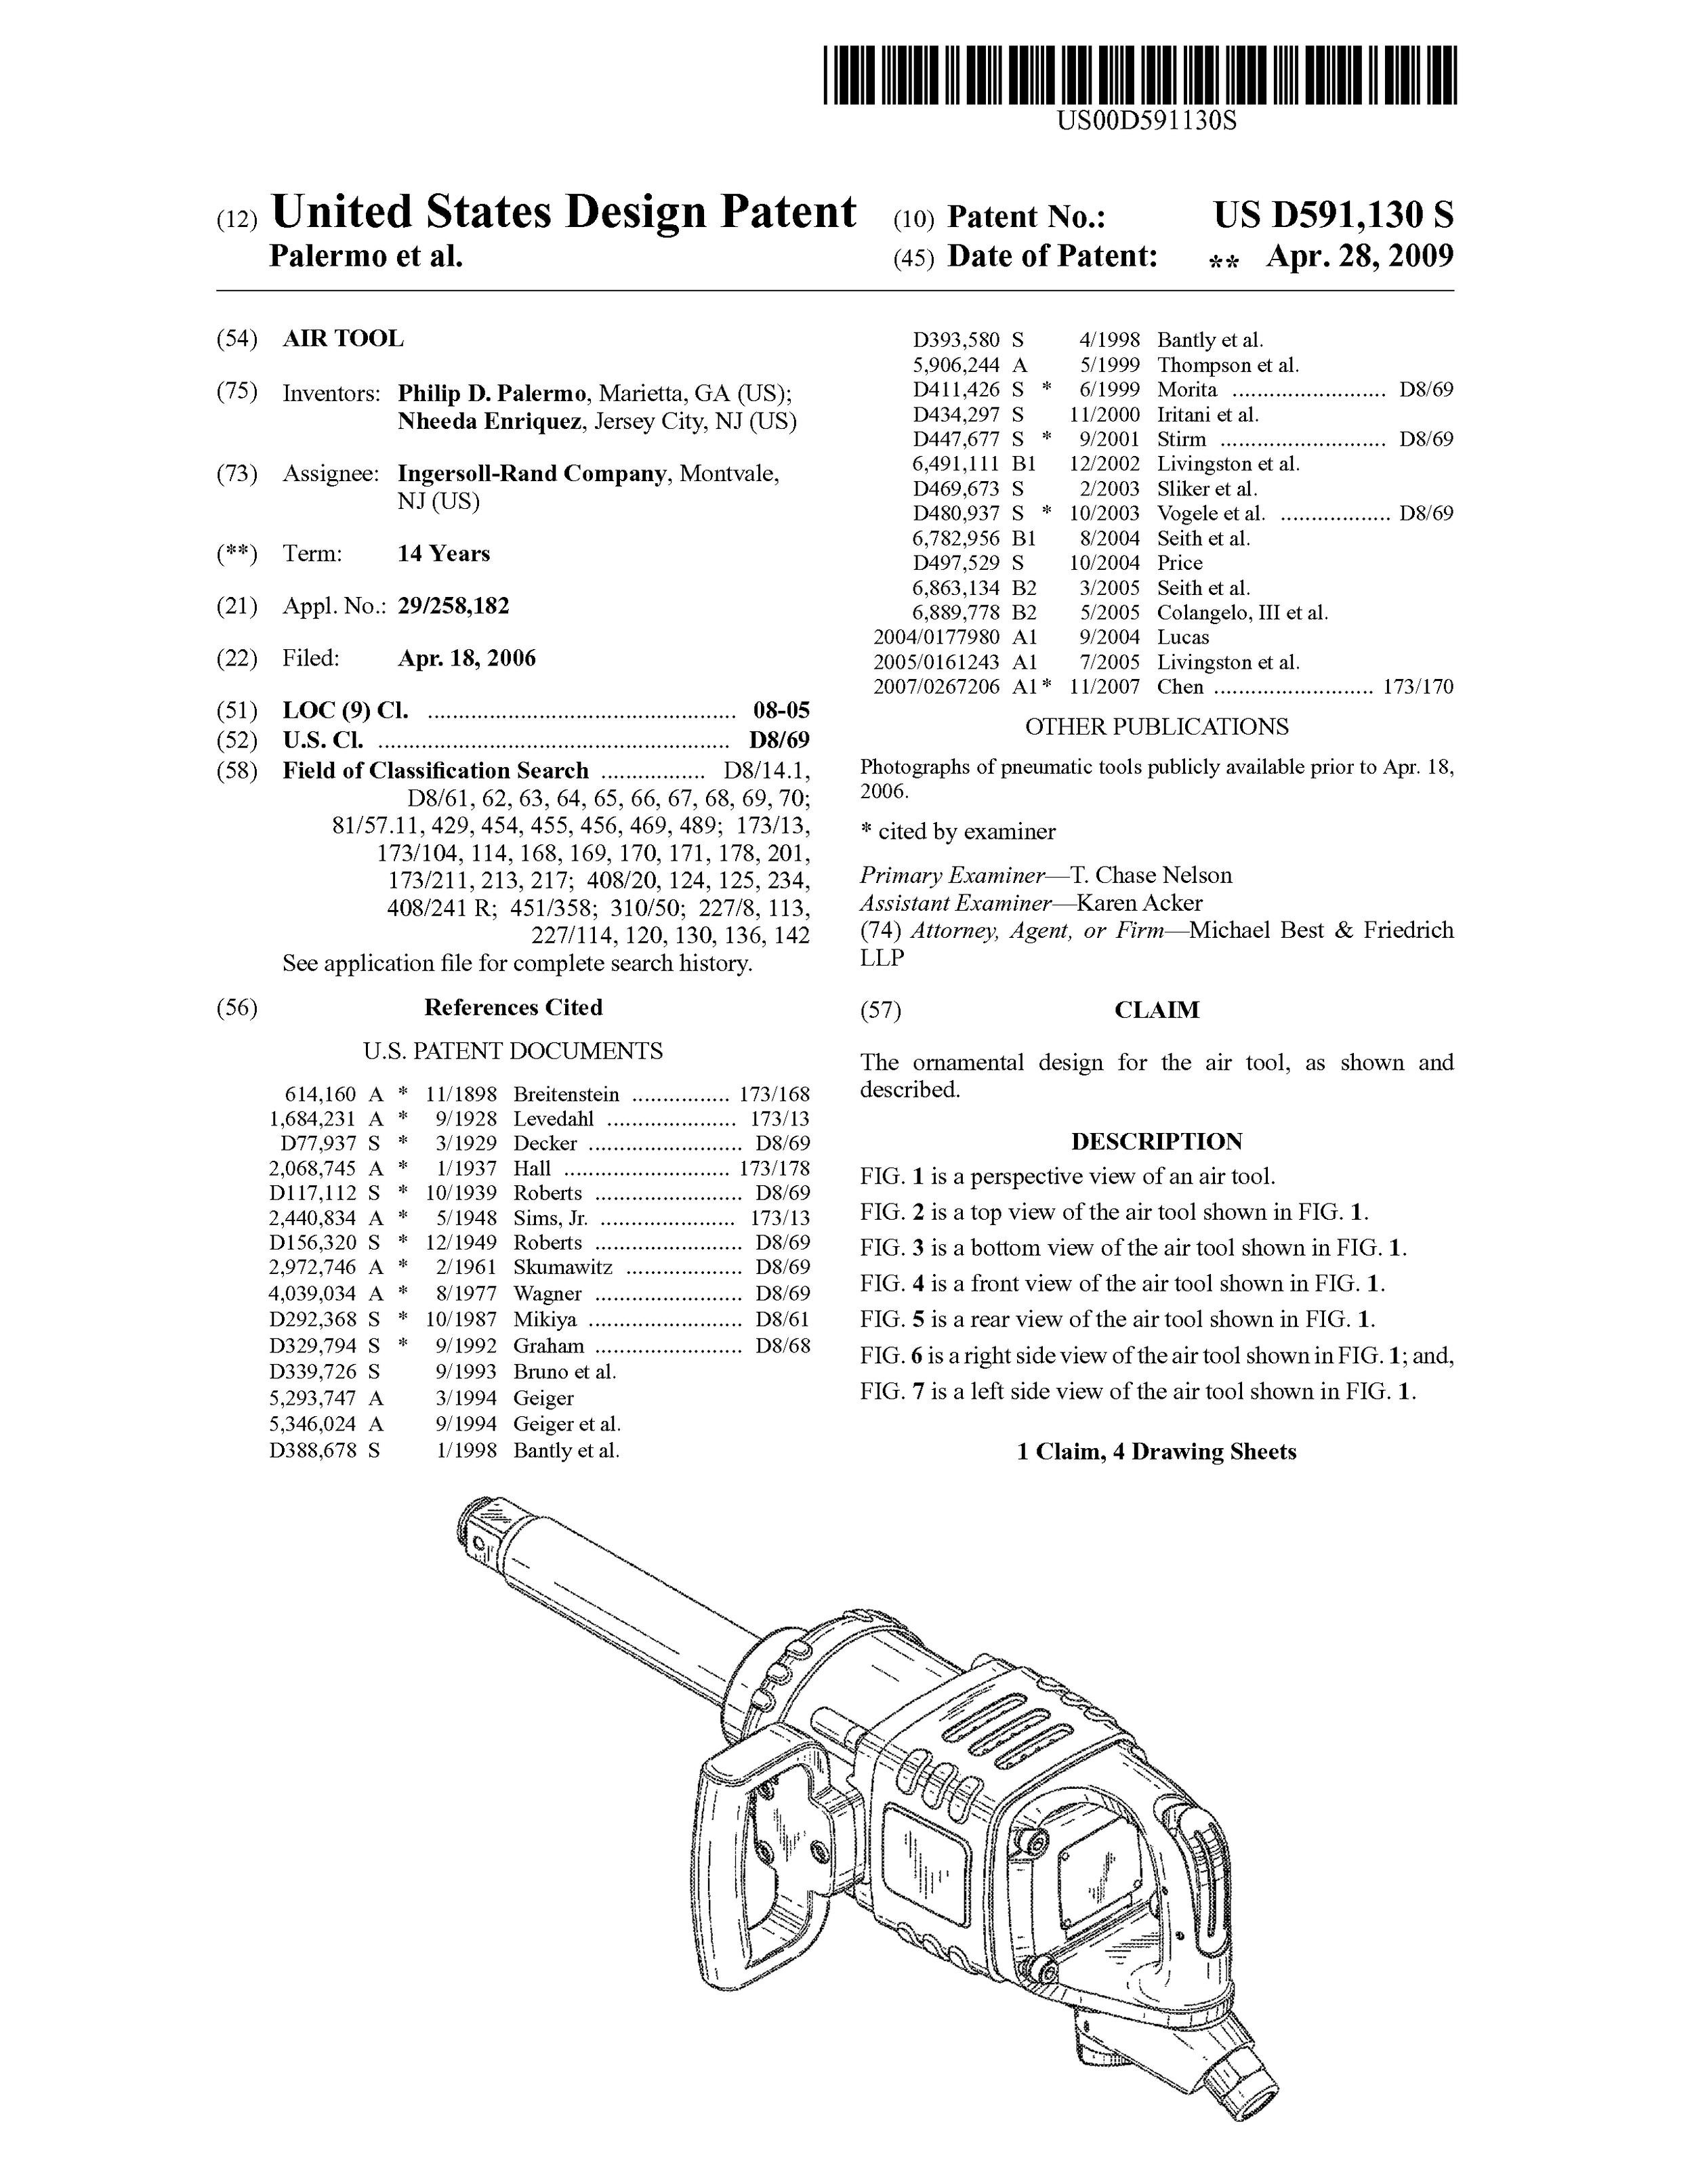 USD591130-1.png